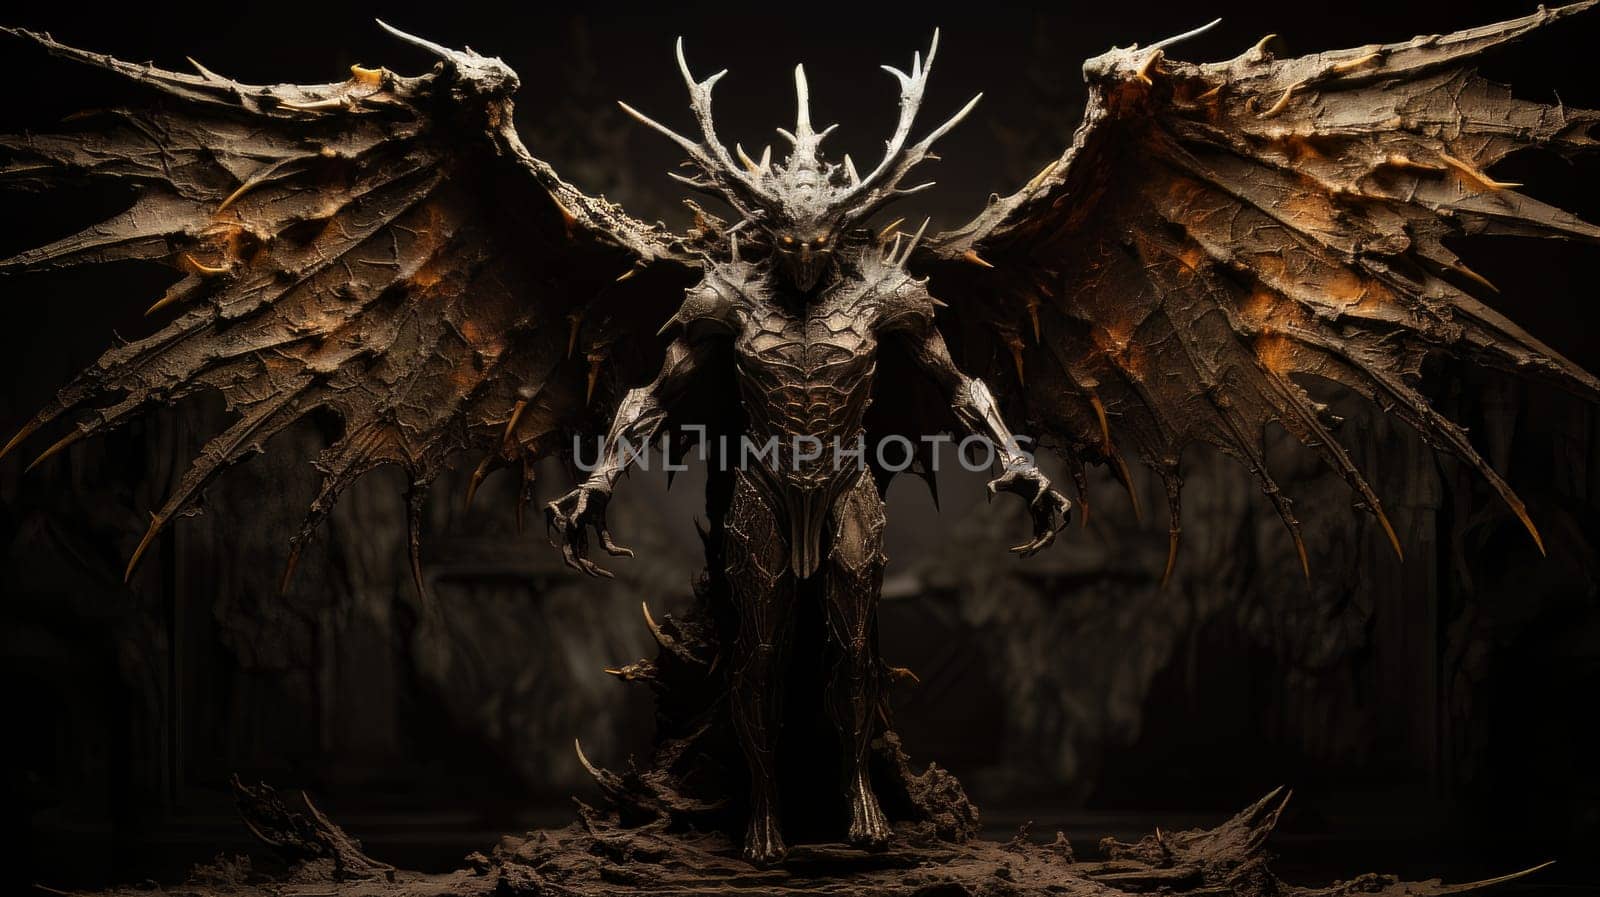 Epic creepy demon of hell with dark wings, punisher of all sinners, the enemy of God. Apocalypse, Halloween, horror story, AI